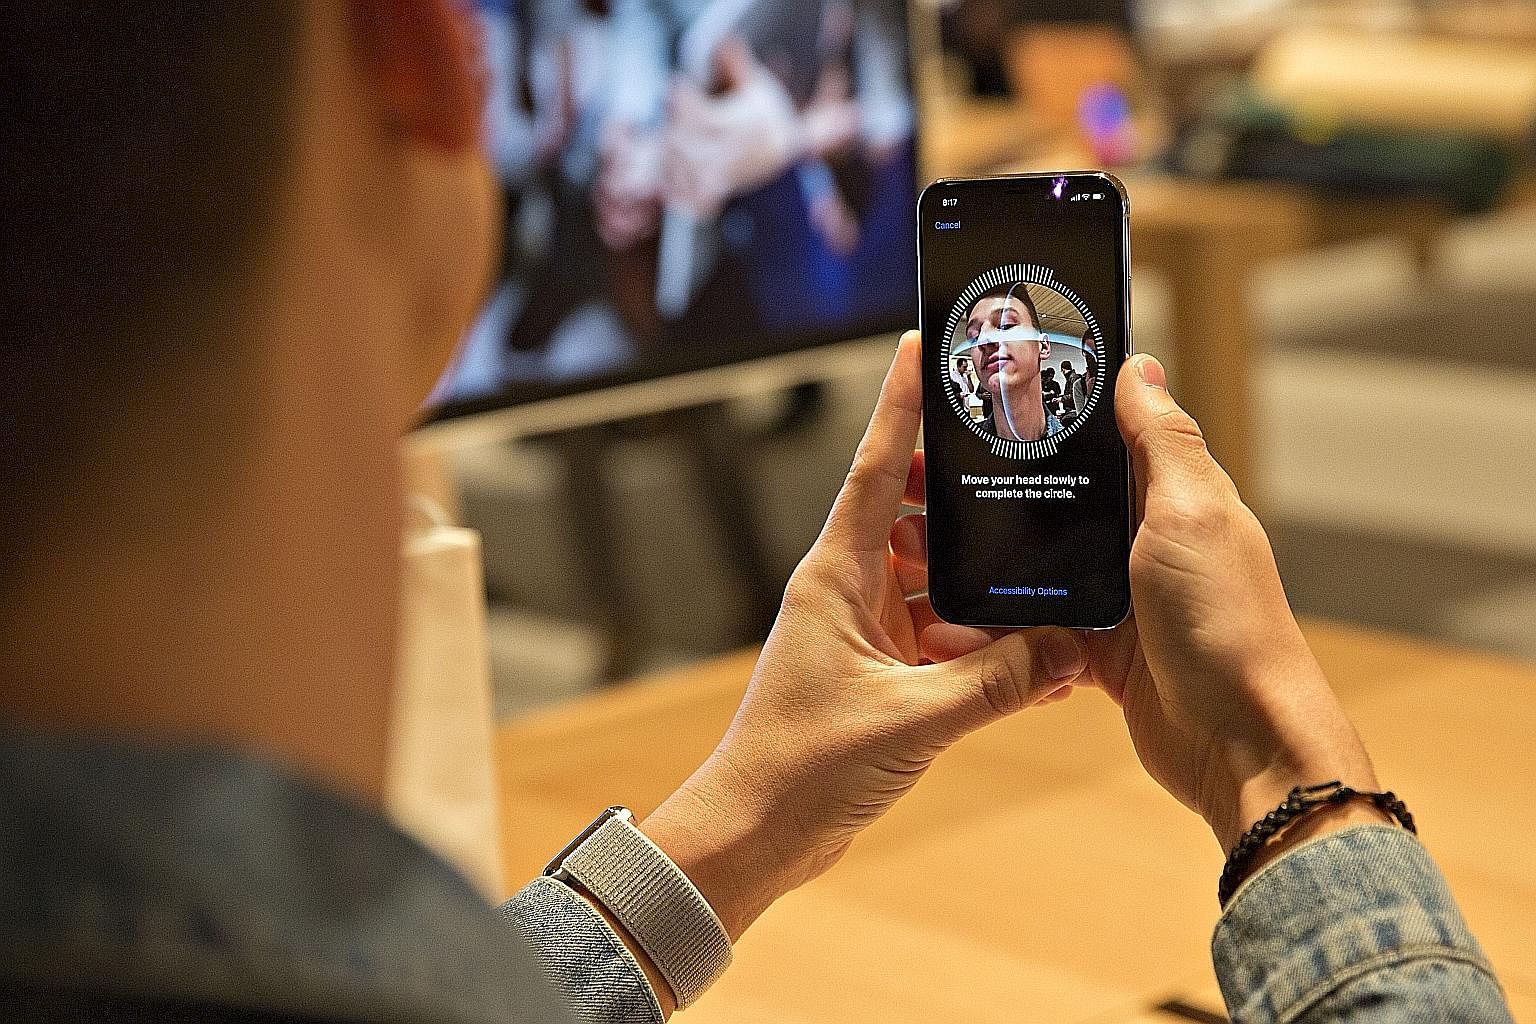 An iPhone X user setting up Face ID on his phone. The phone uses infrared and 3D sensors to make a comprehensive map of a user's face. It is smart enough to detect changes to a face, such as with spectacles or a new beard, but cannot tell identical t